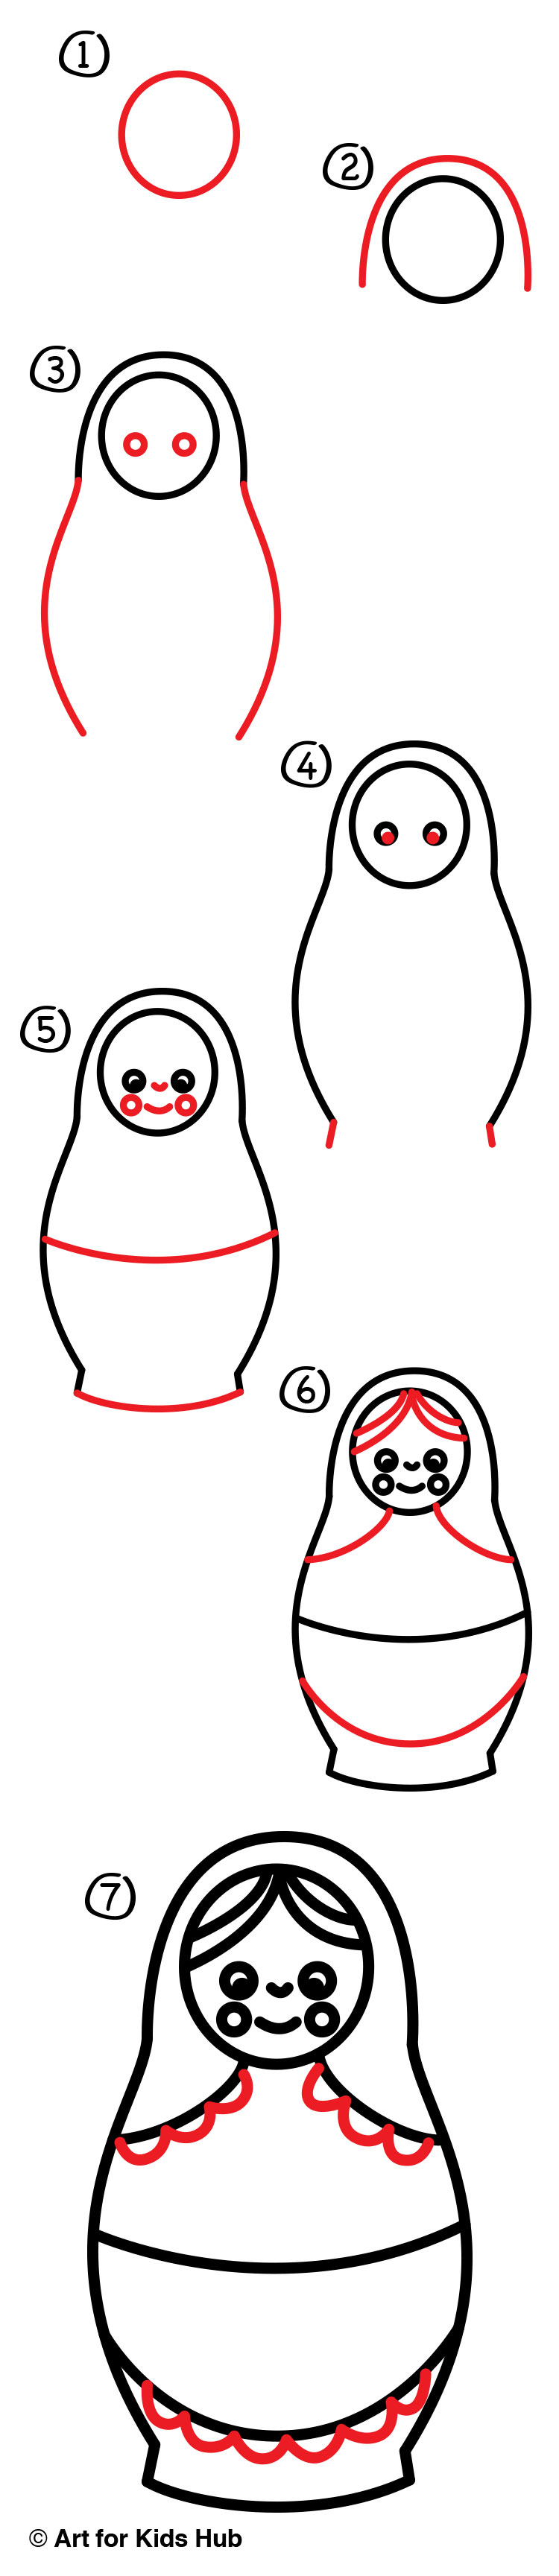 How To Draw A Russian Nesting Doll - Art For Kids Hub